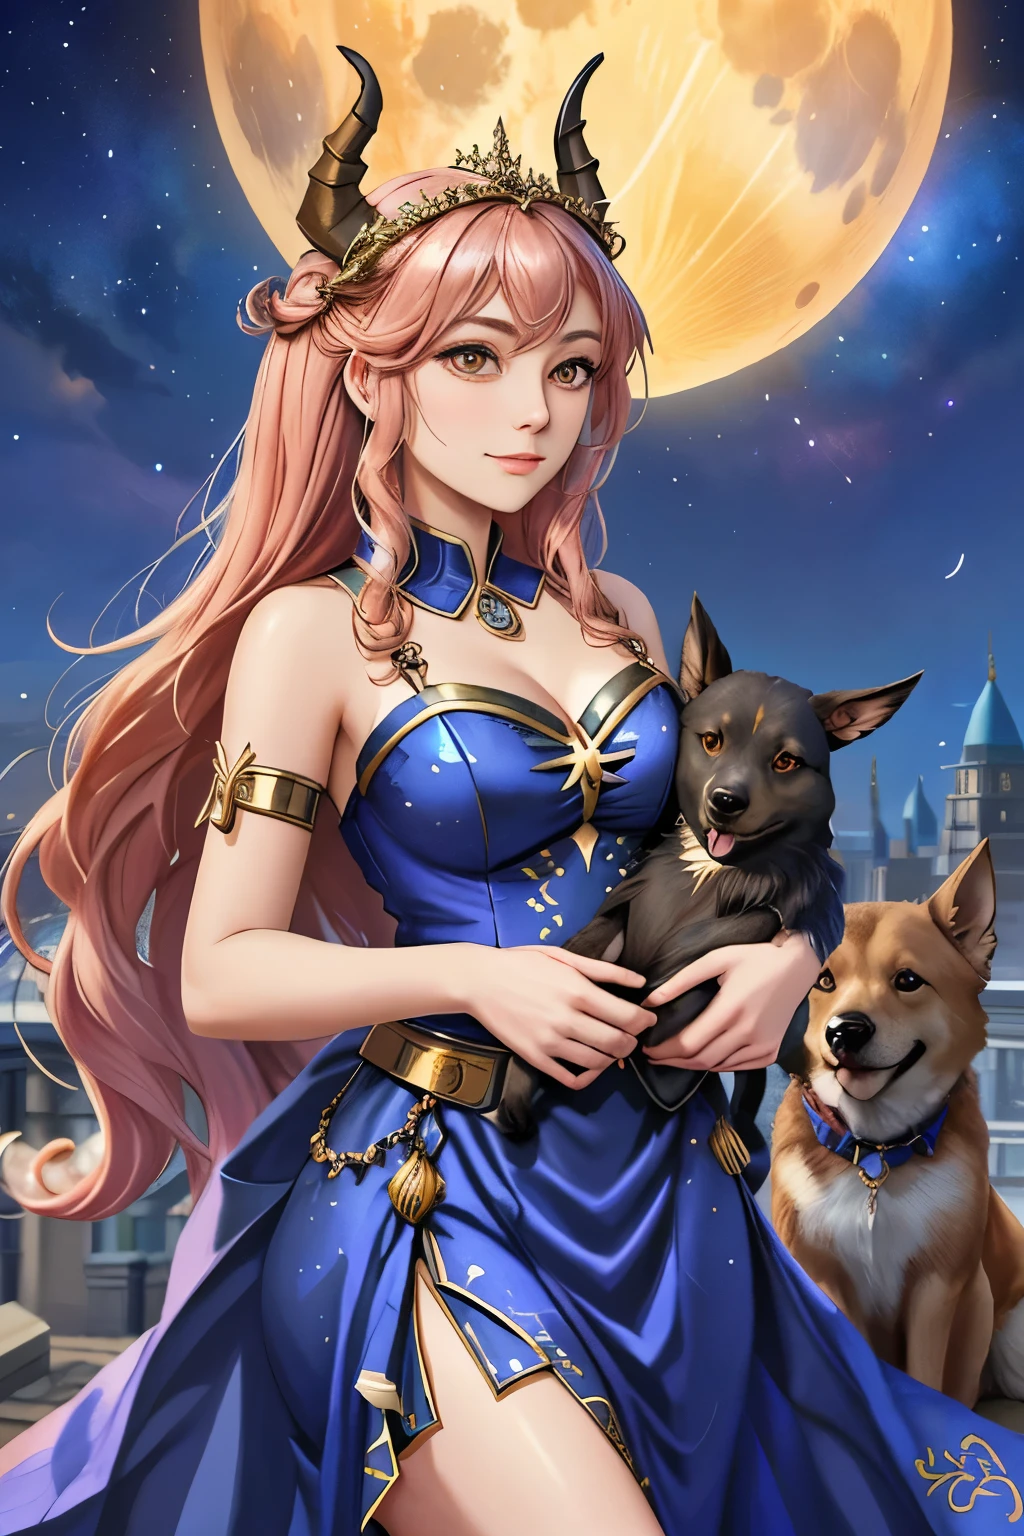 a woman with horns and a dress holding two dogs, airmax12,  jen bartel, by Andrée Ruellan, by Caroline Chariot-Dayez, by Max Buri, goddess art, cosmic goddess, ancient goddess, celestial goddess, hecate goddess, moon goddess, by Petros Afshar, by Kyle Lambert, art contest winner on behance, mystical anubis valkyrie